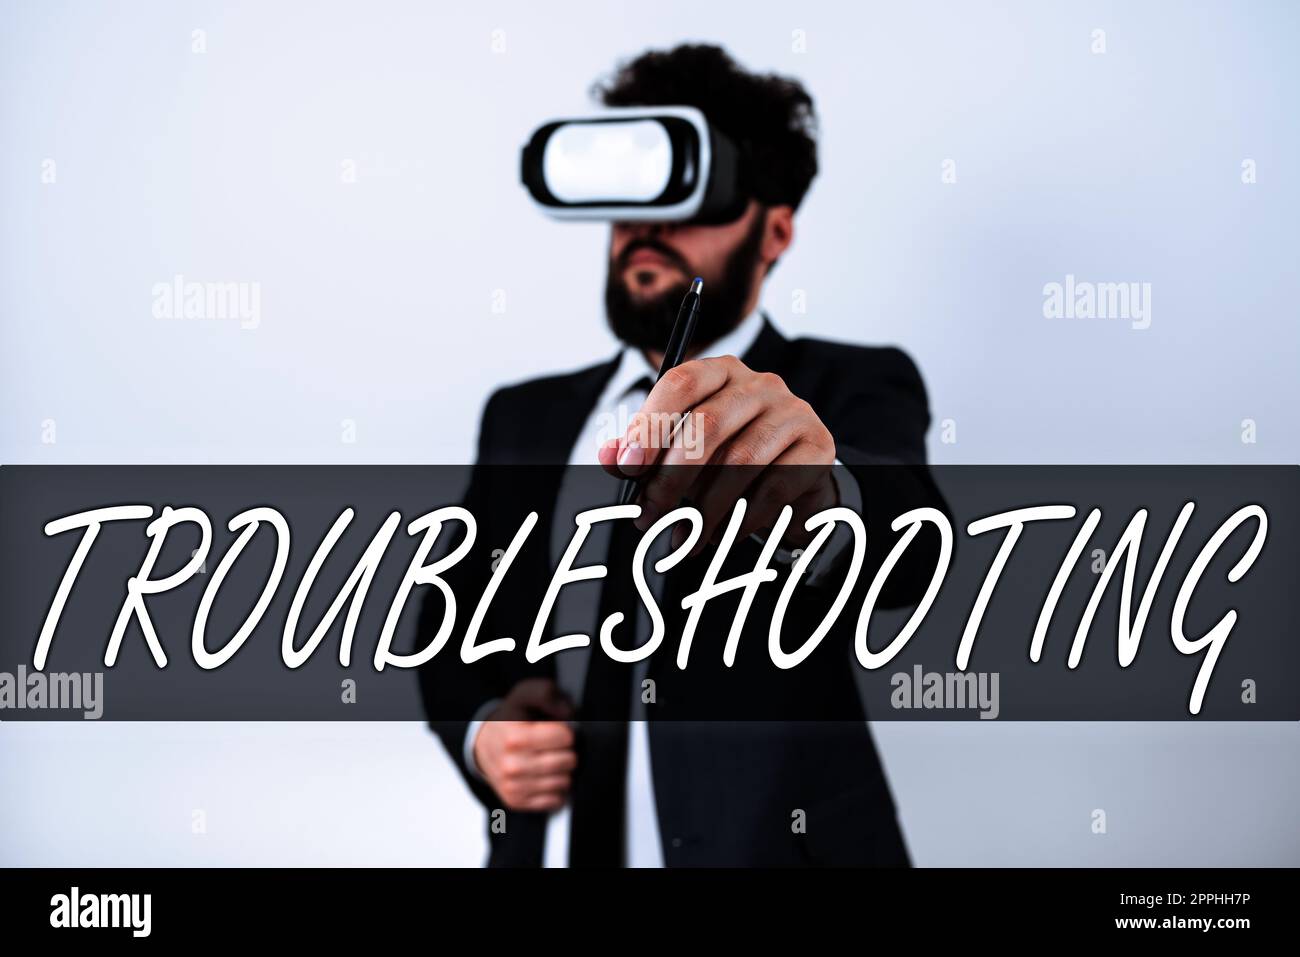 Text showing inspiration Troubleshooting. Word Written on an act of investigating or dealing with in the problems occured Stock Photo